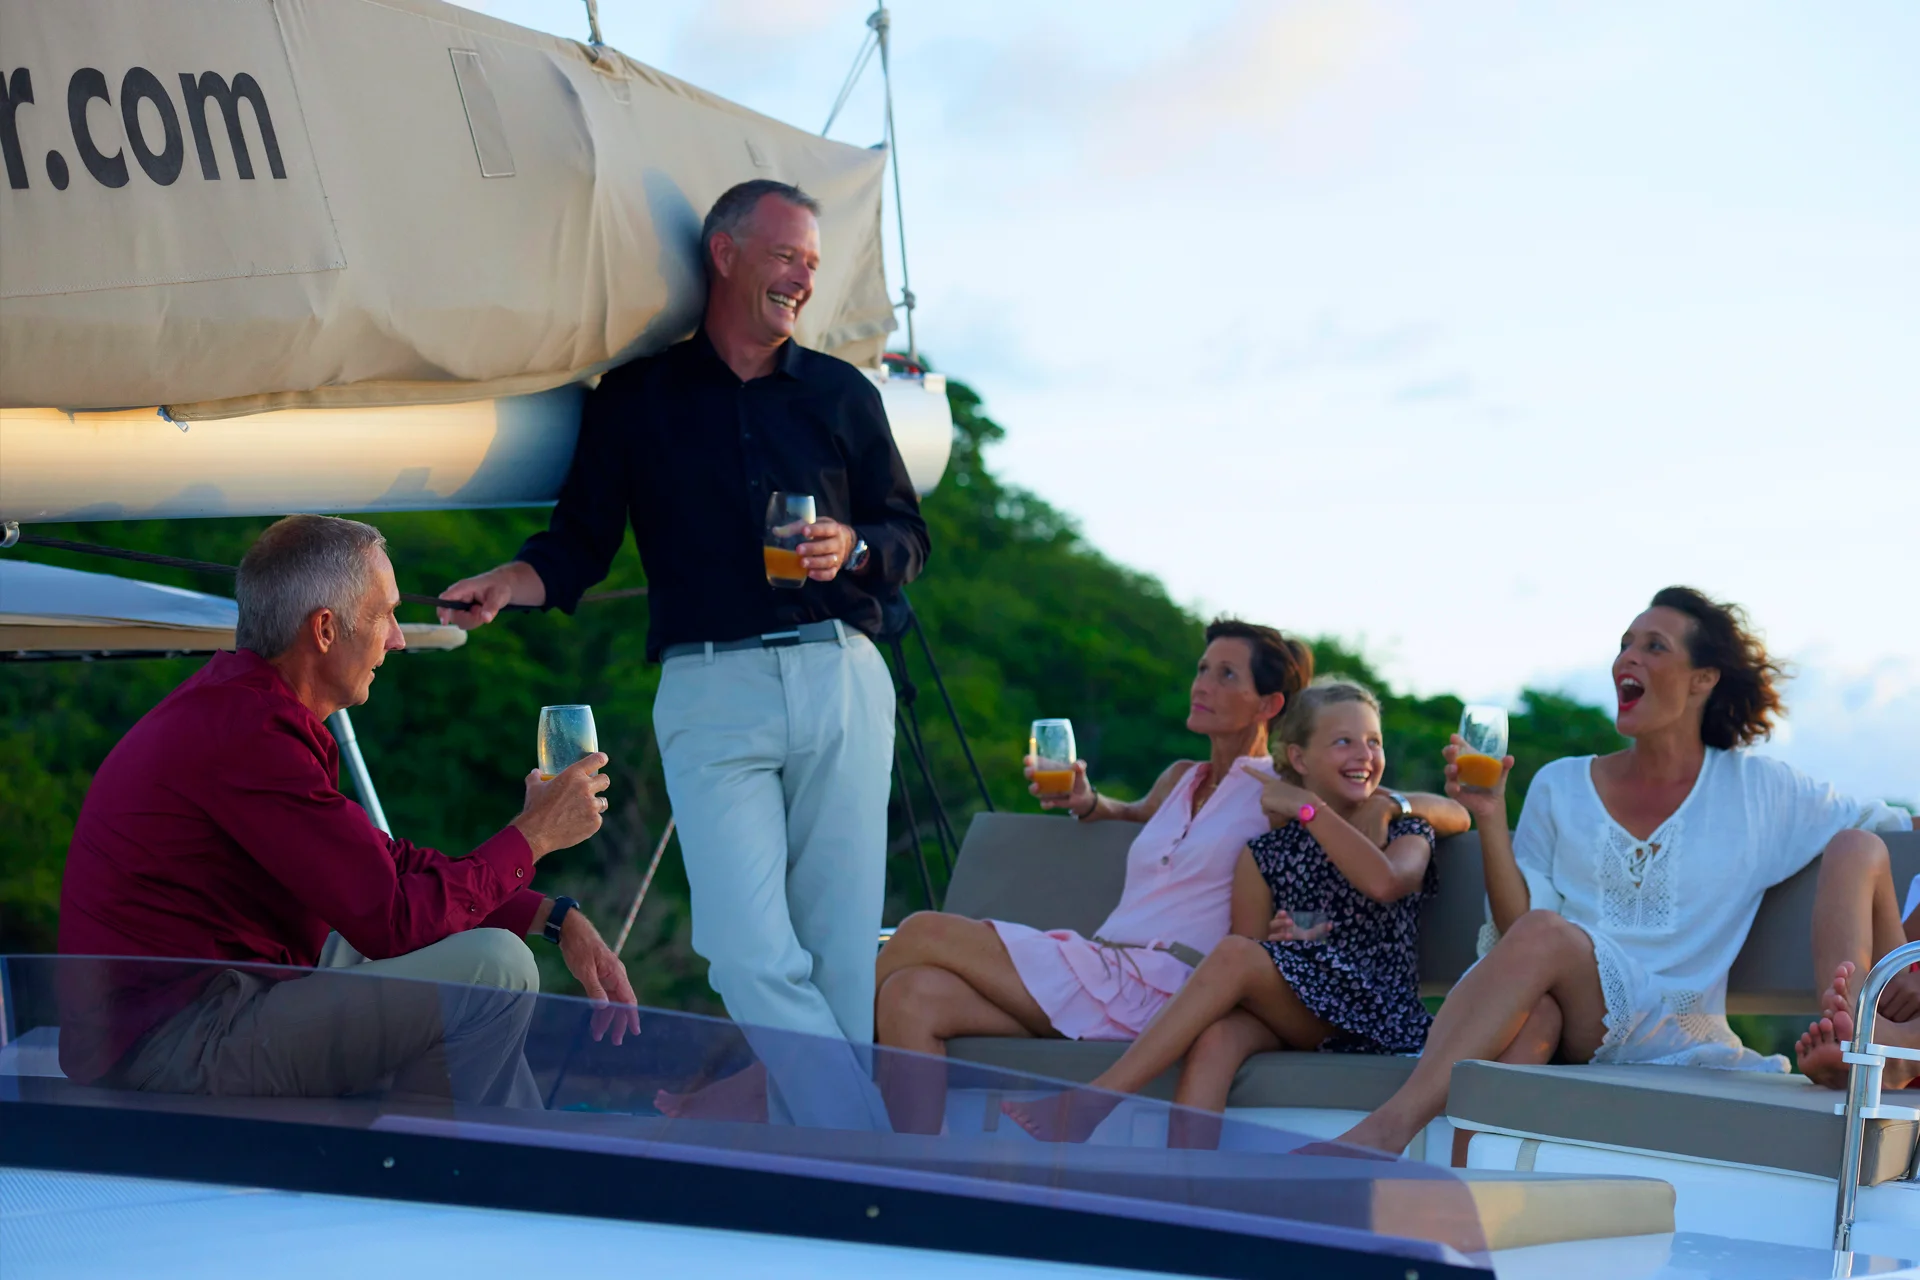 Friends and family enyoying vacations in a crewed fully yacht charter at sunset